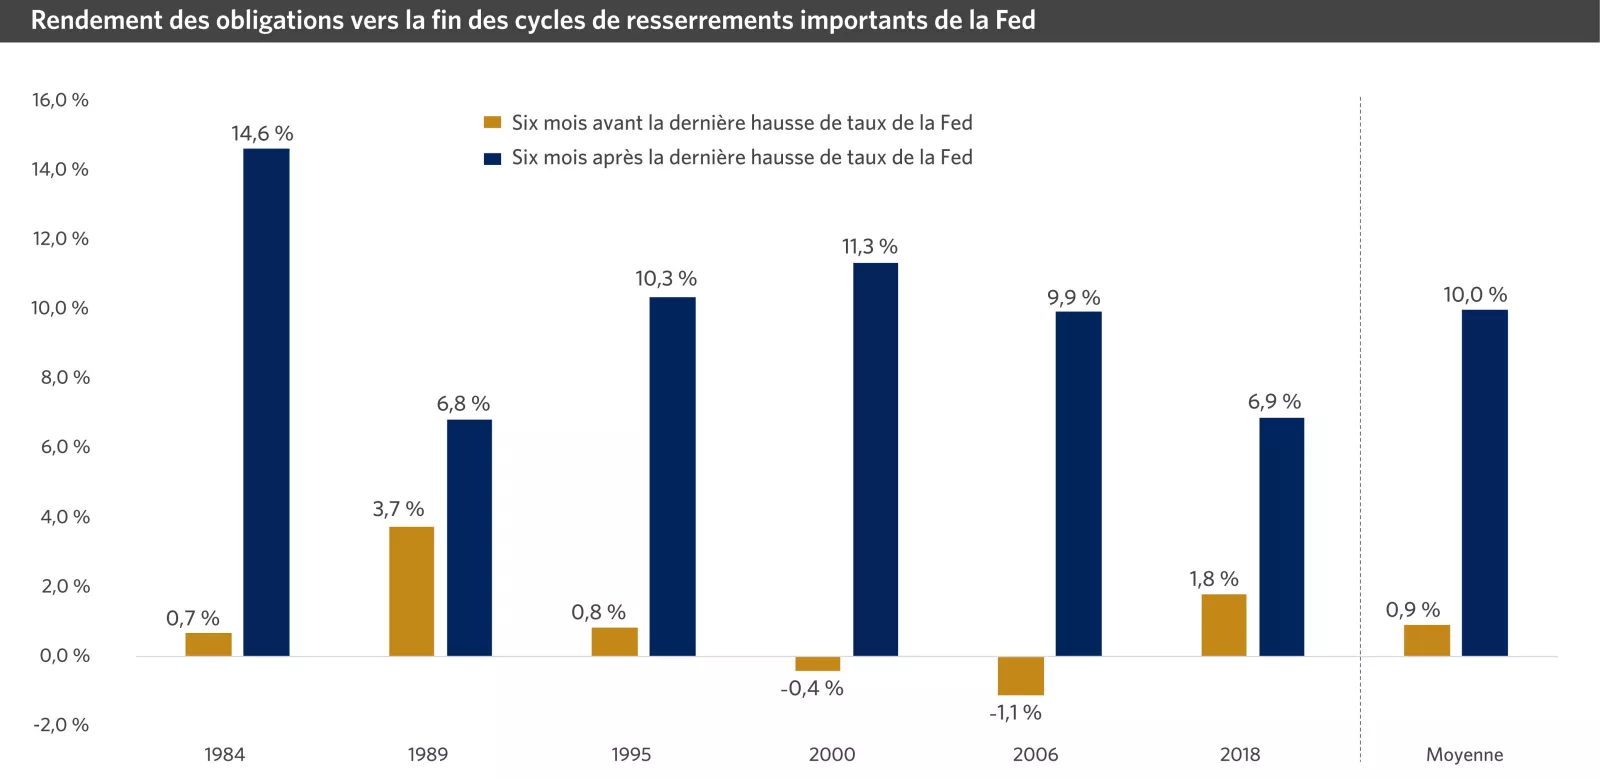 Chart showing Bond performance around end of major Fed tightening cycles